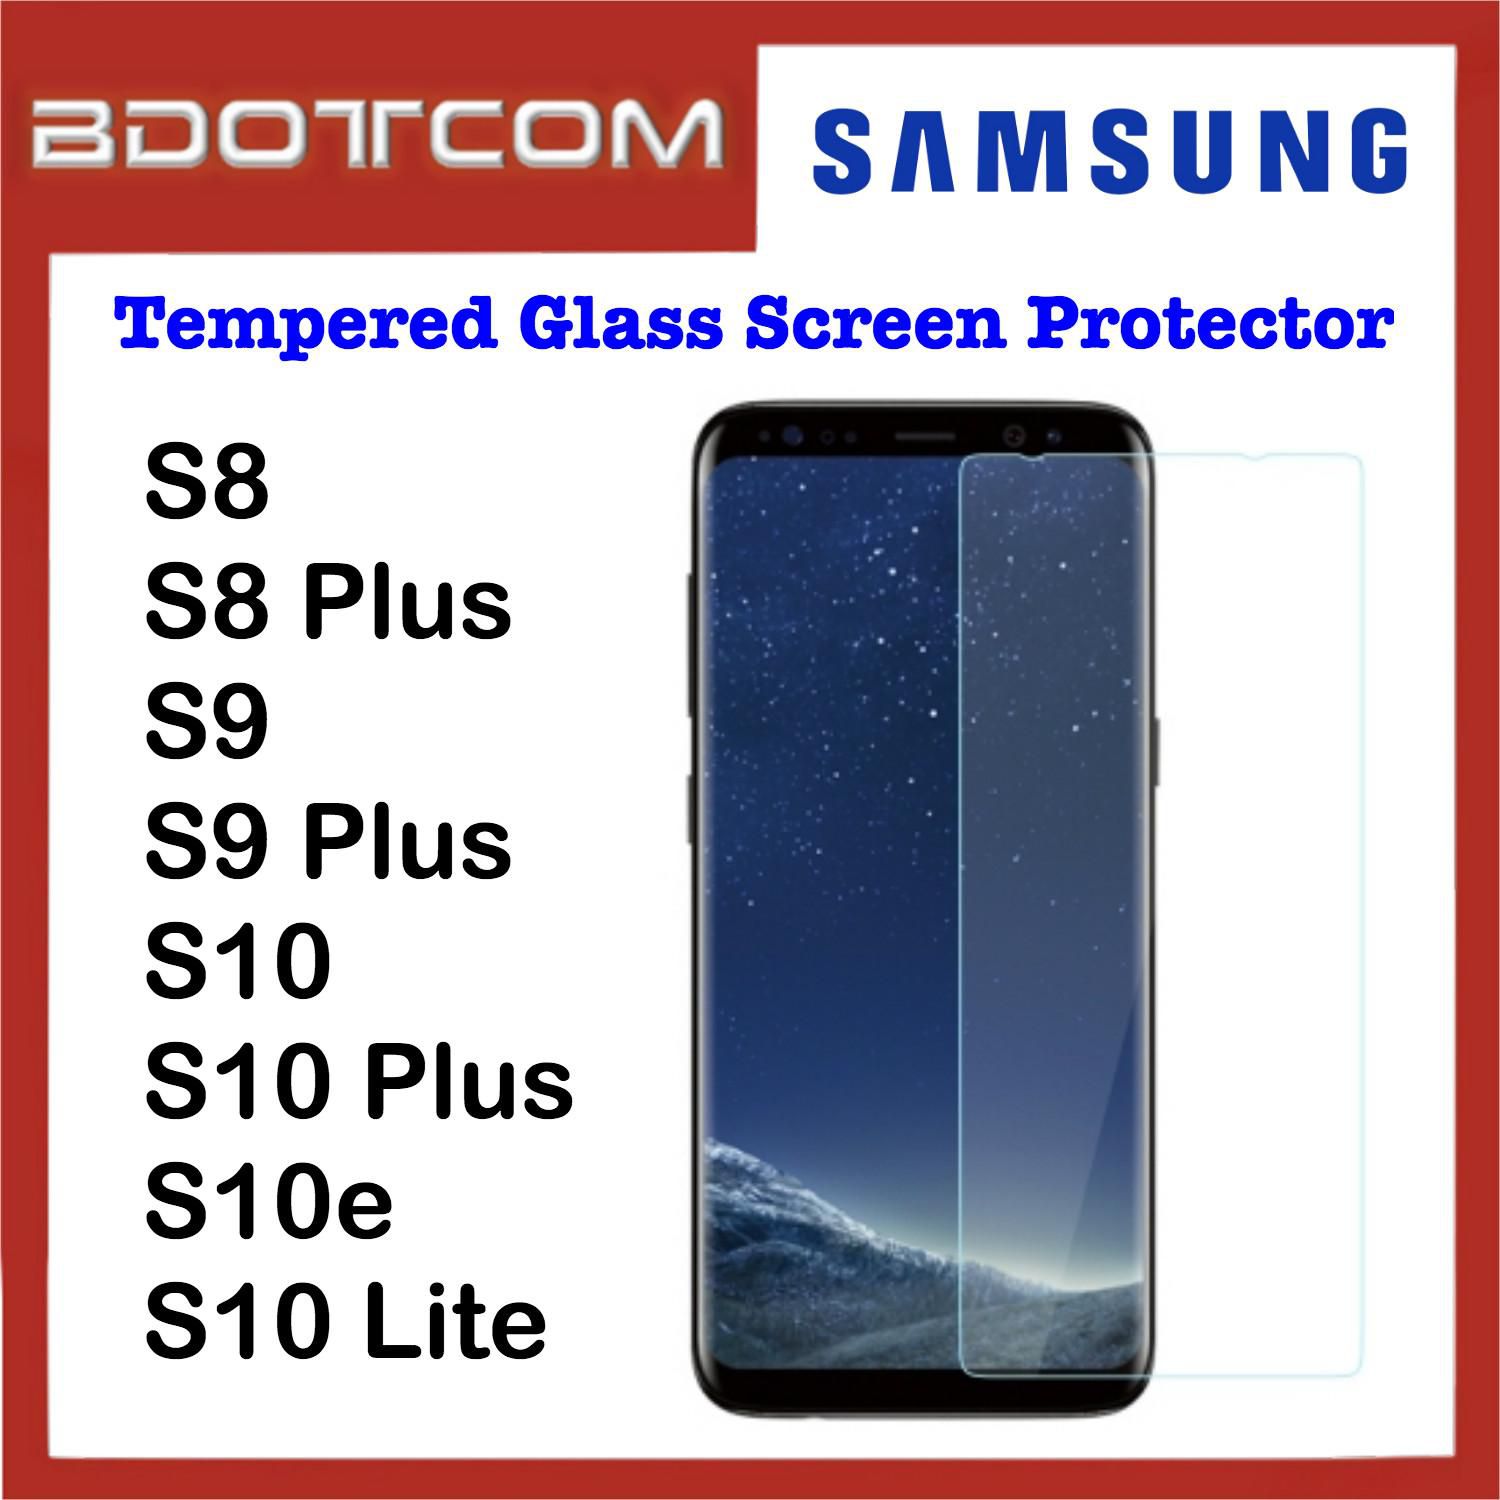 Samsung Tempered Glass Screen Protector for Samsung Galaxy S8